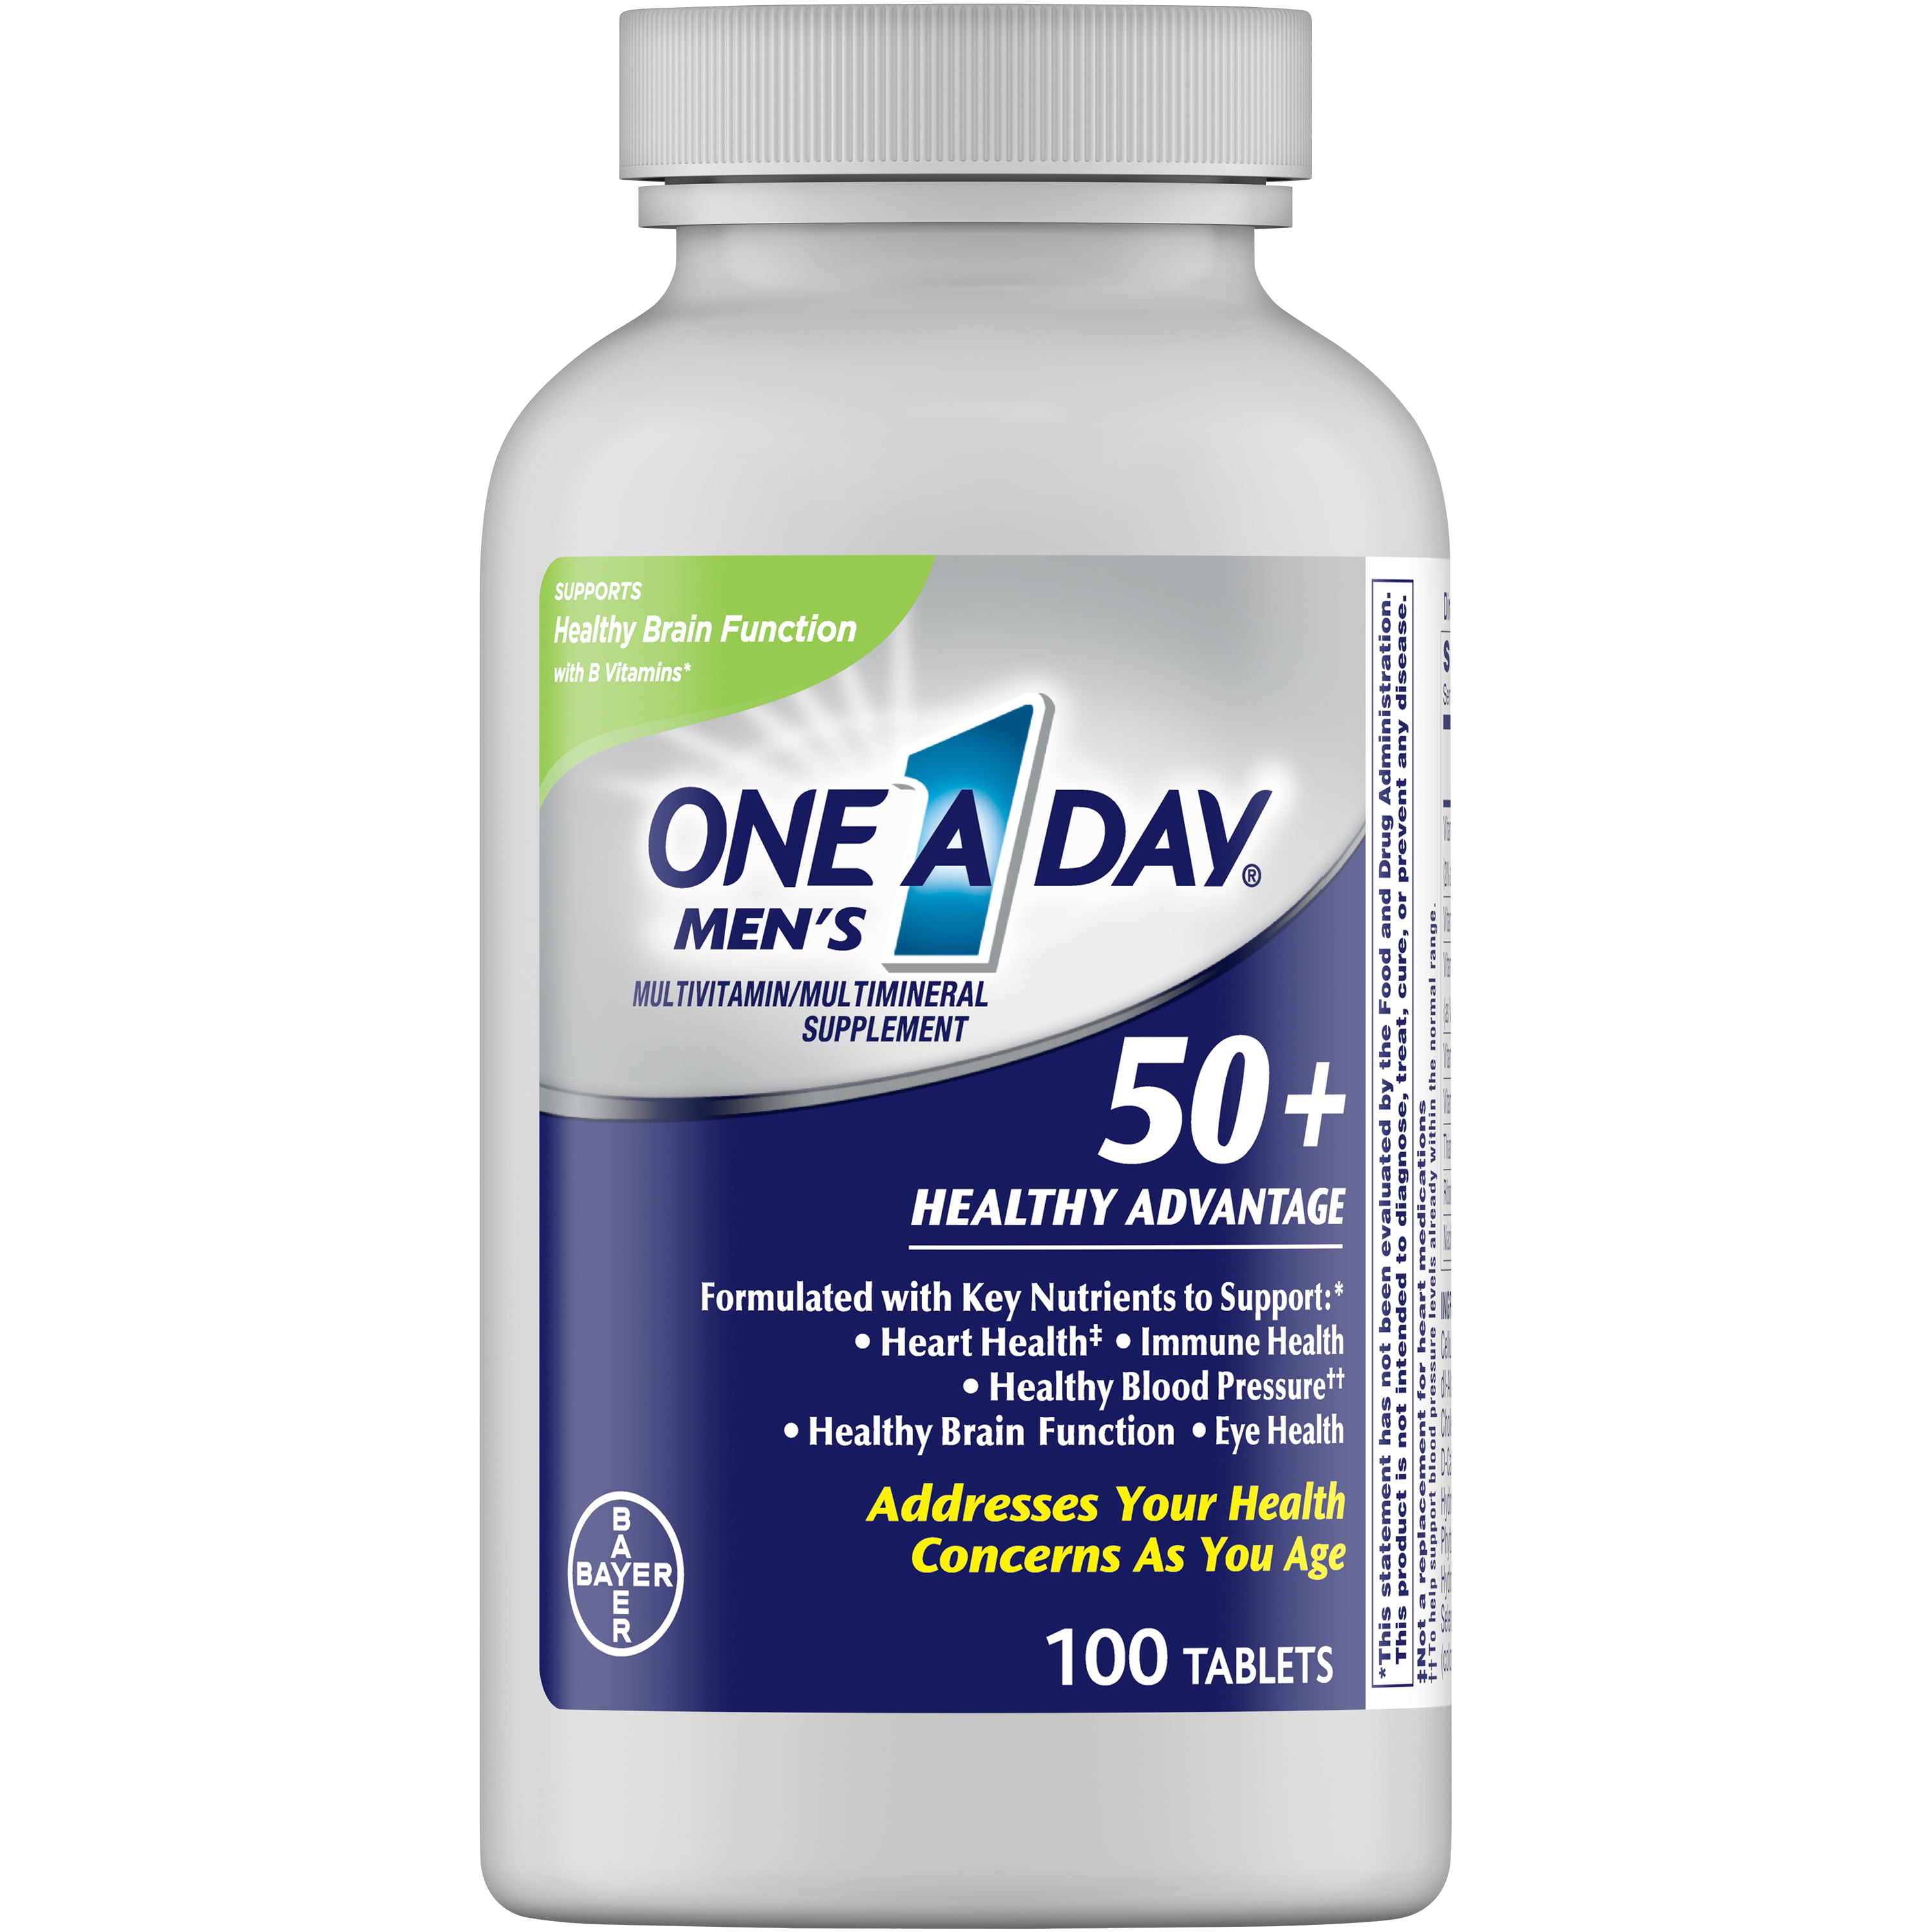 Мужчина 50 плюс. One a Day витамины для мужчин Bayer. Витамины one a Day men's 50+. 1 A Day витамины Bayer. One-a-Day Mens 50+ healthy advantage.